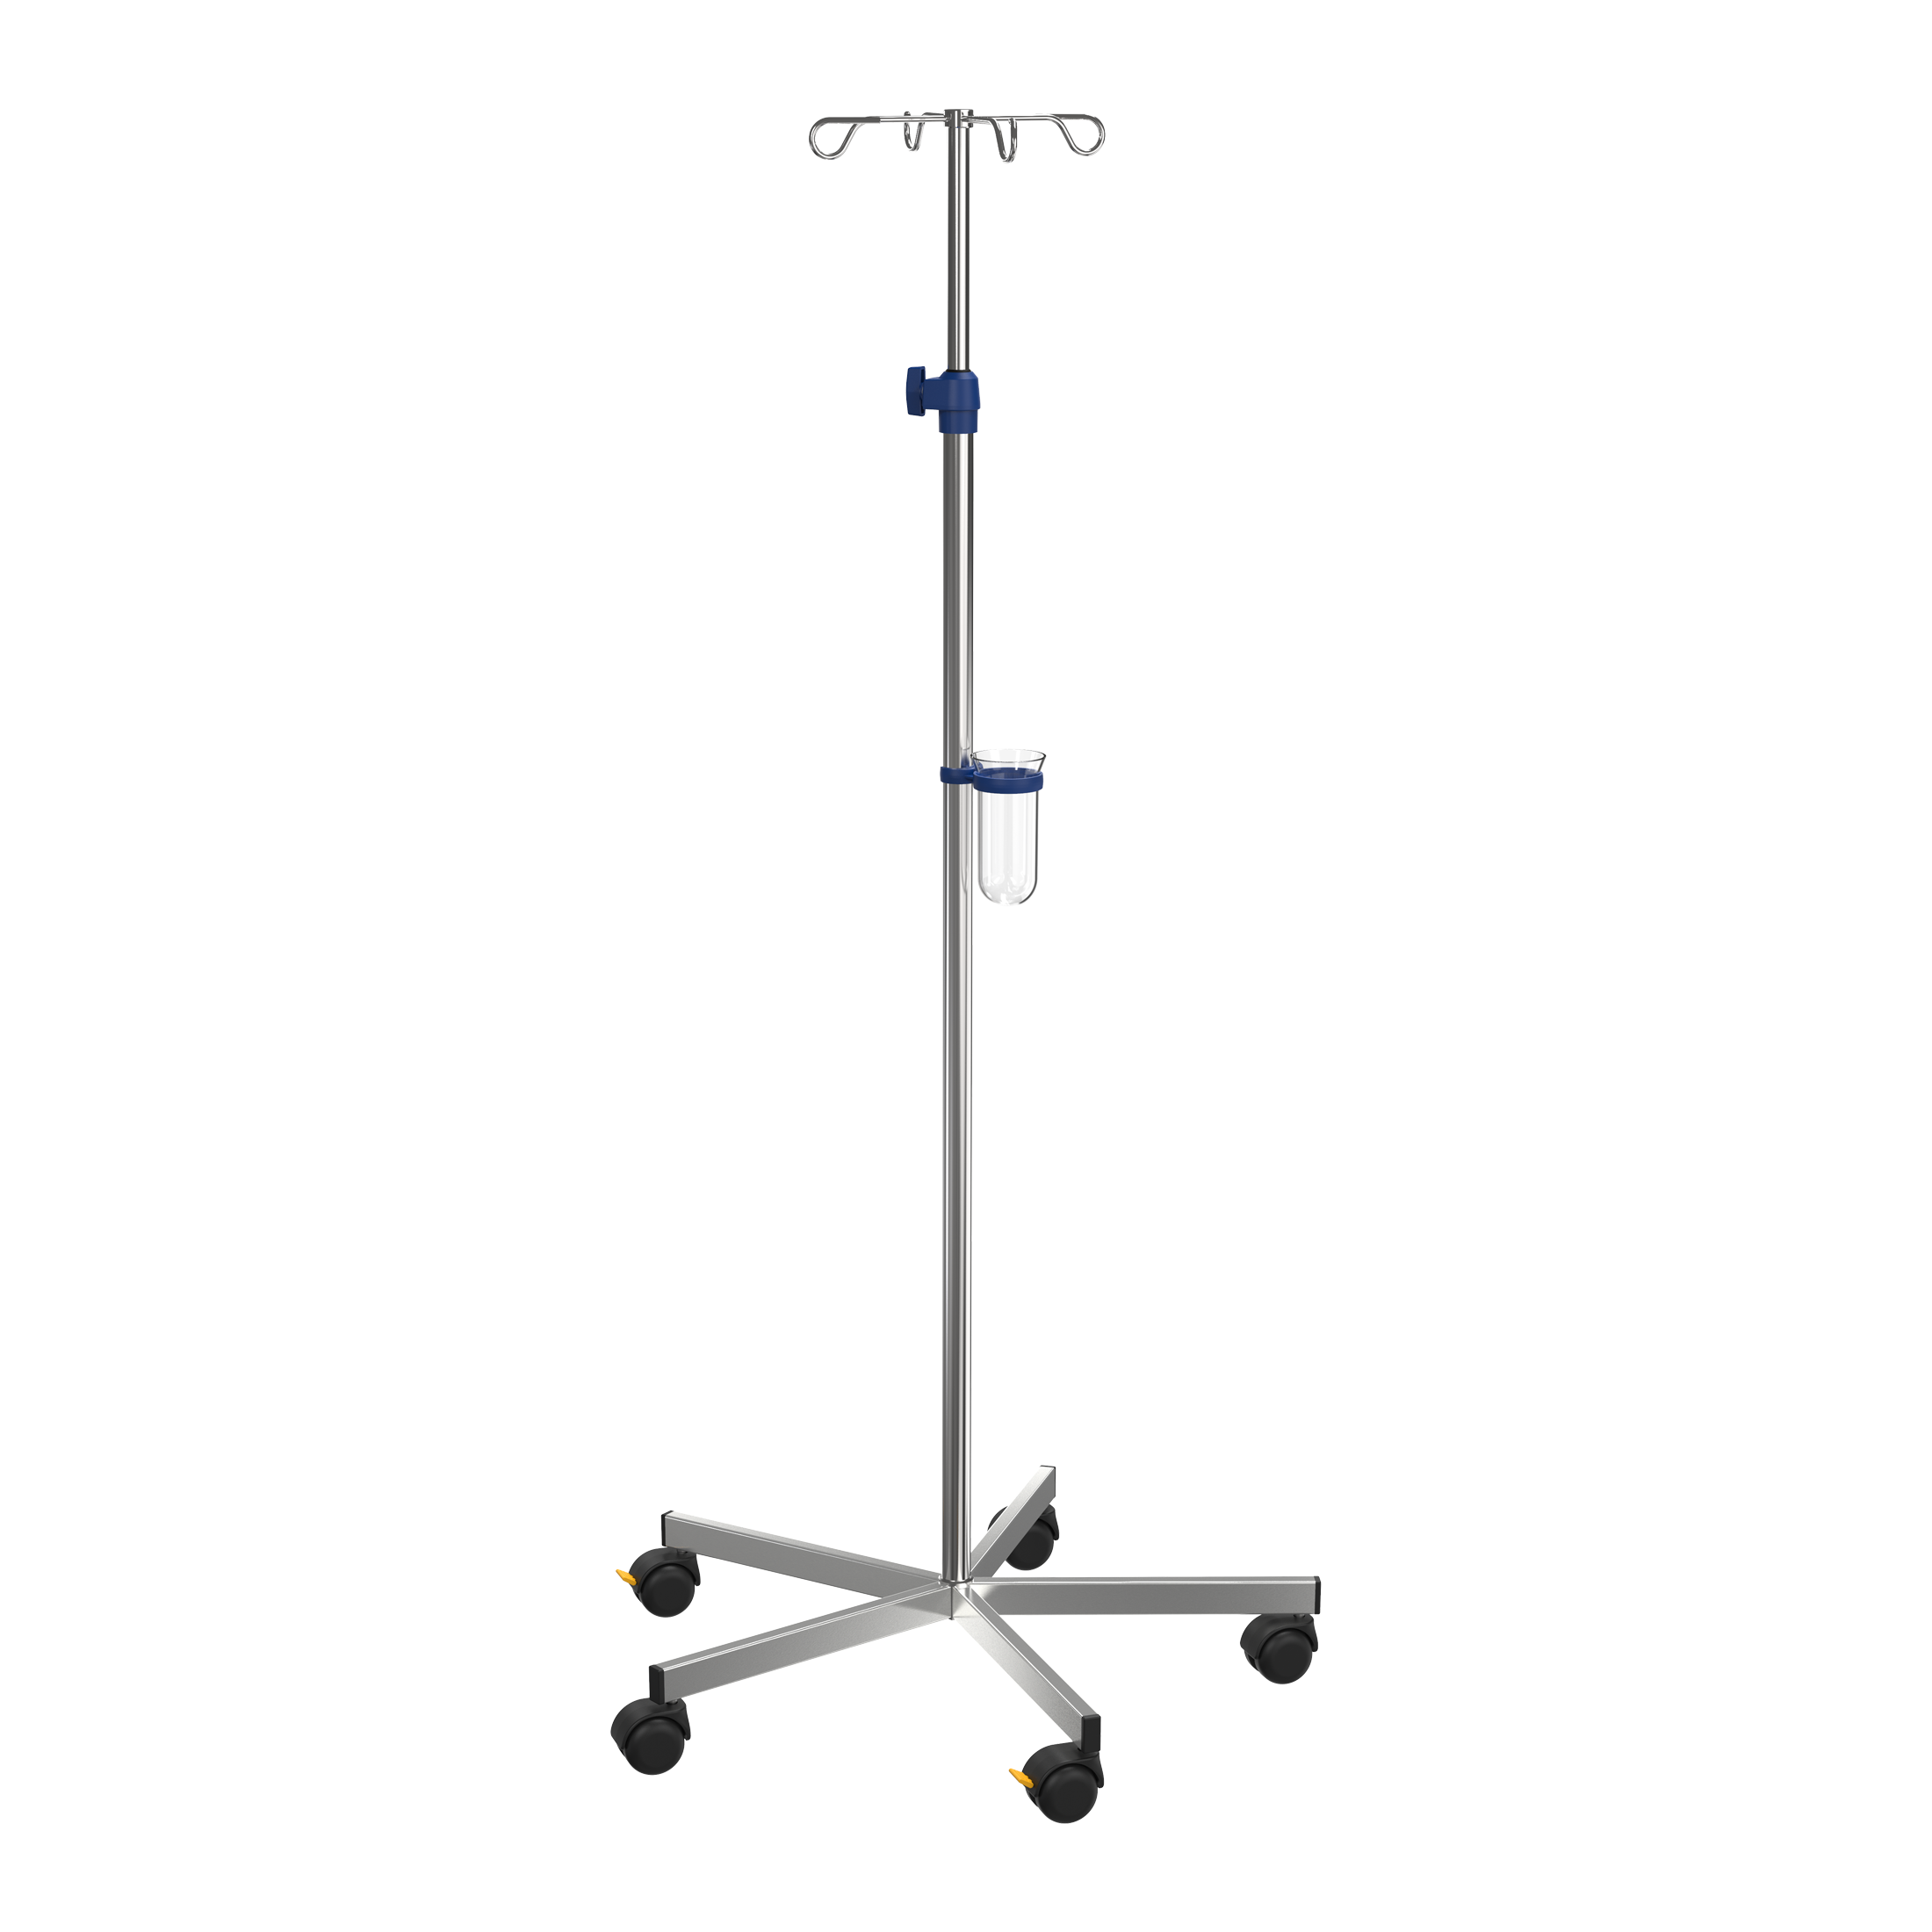 IV-stand / Drip stand